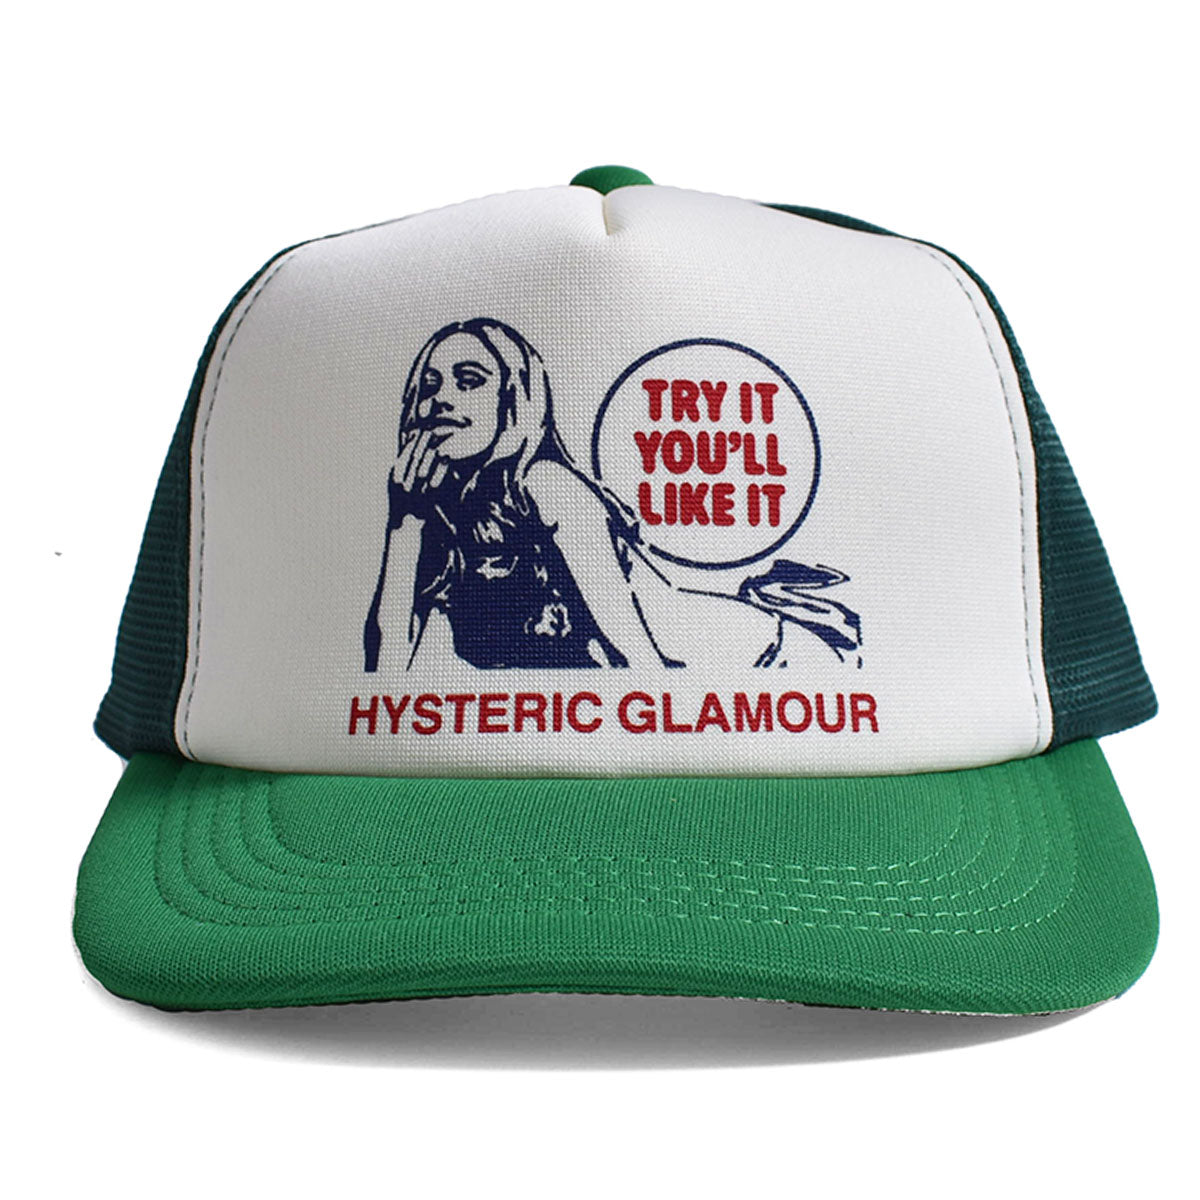 HYSTERIC GLAMOUR]TRY IT YOU'LL LIKE IT メッシュキャップ/GREEN 